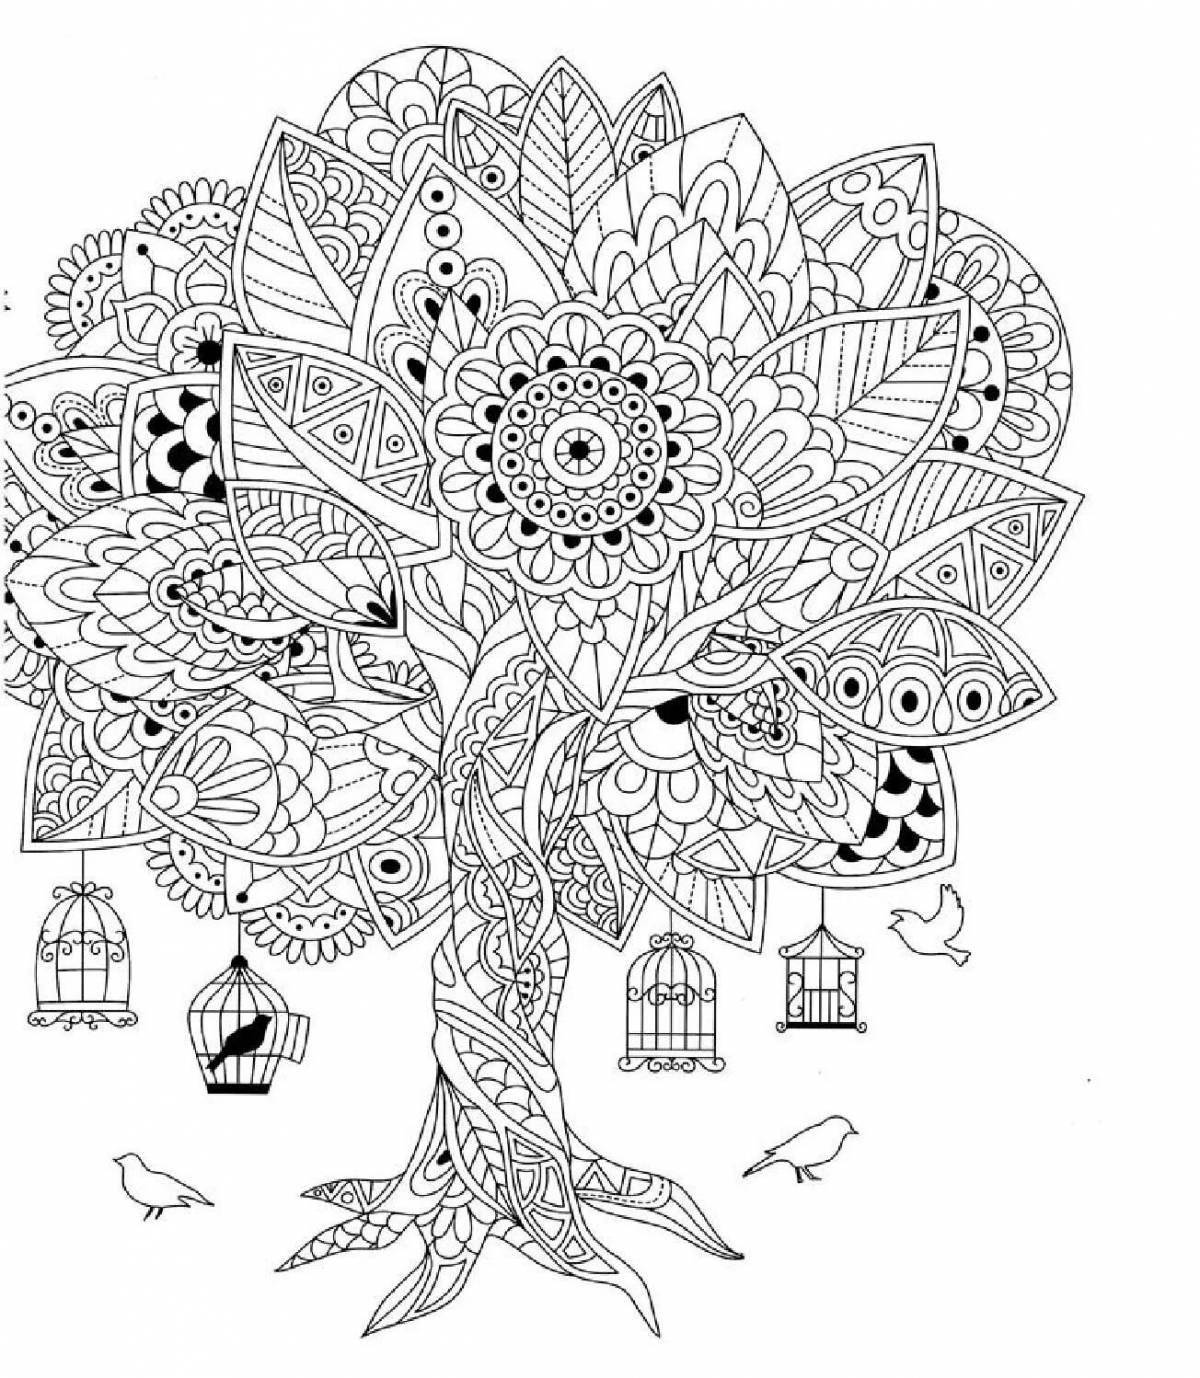 Radiant travel coloring book